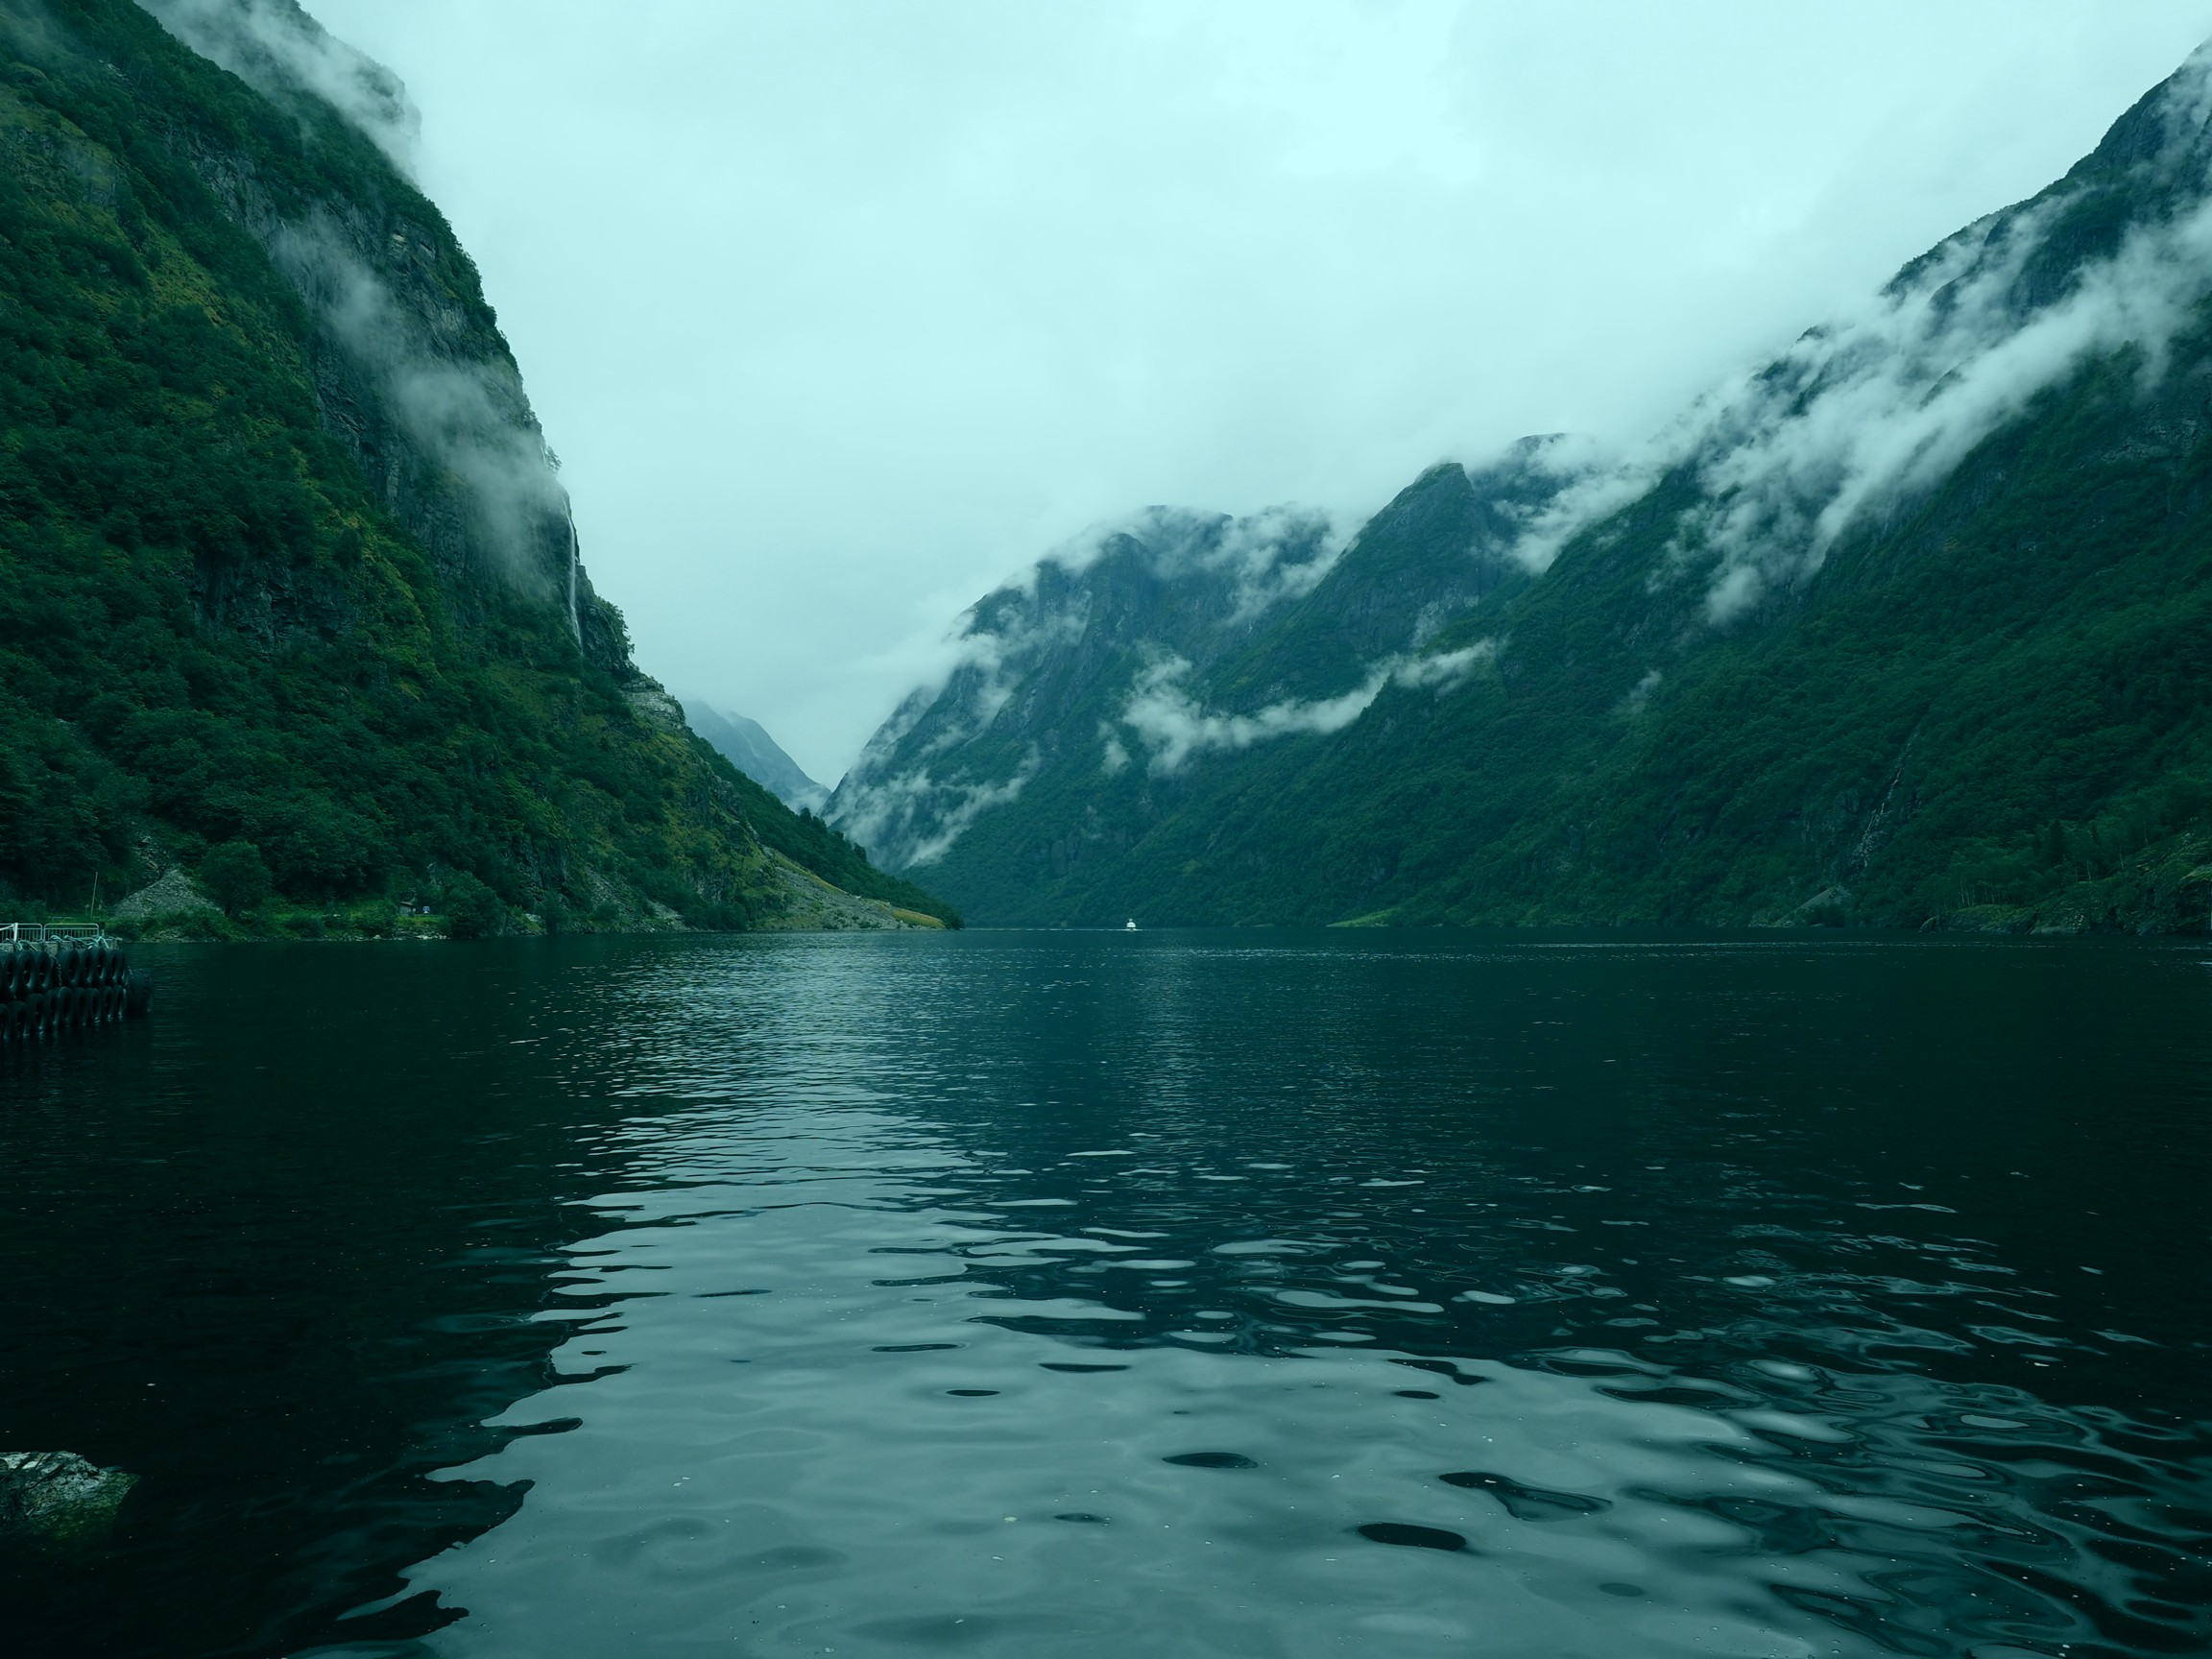 Photograph of a fjord in Norway with a cast added.